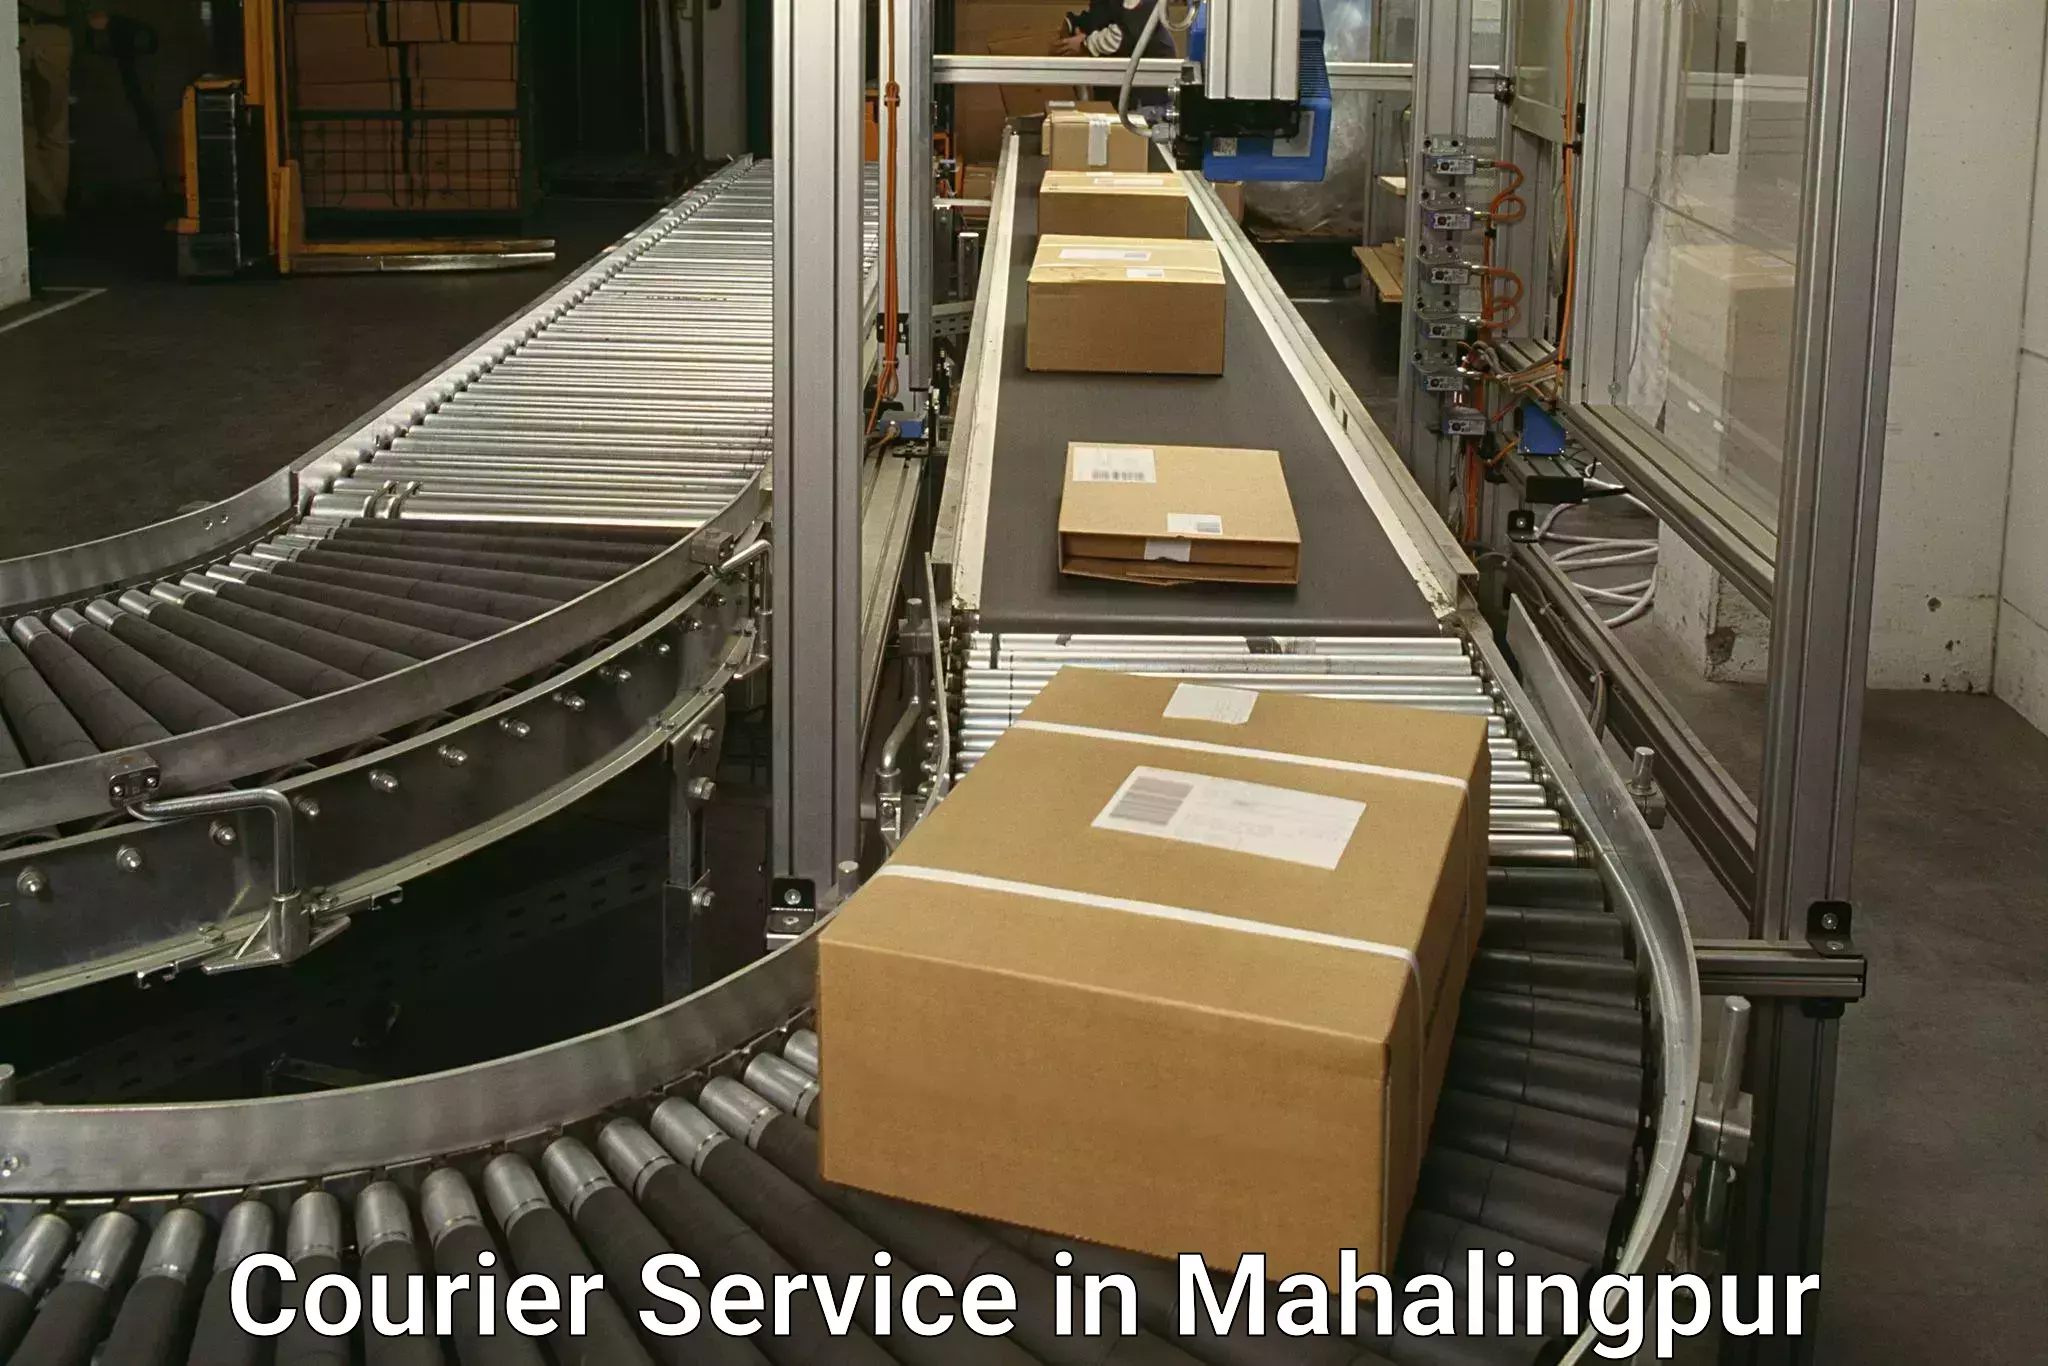 Courier services in Mahalingpur